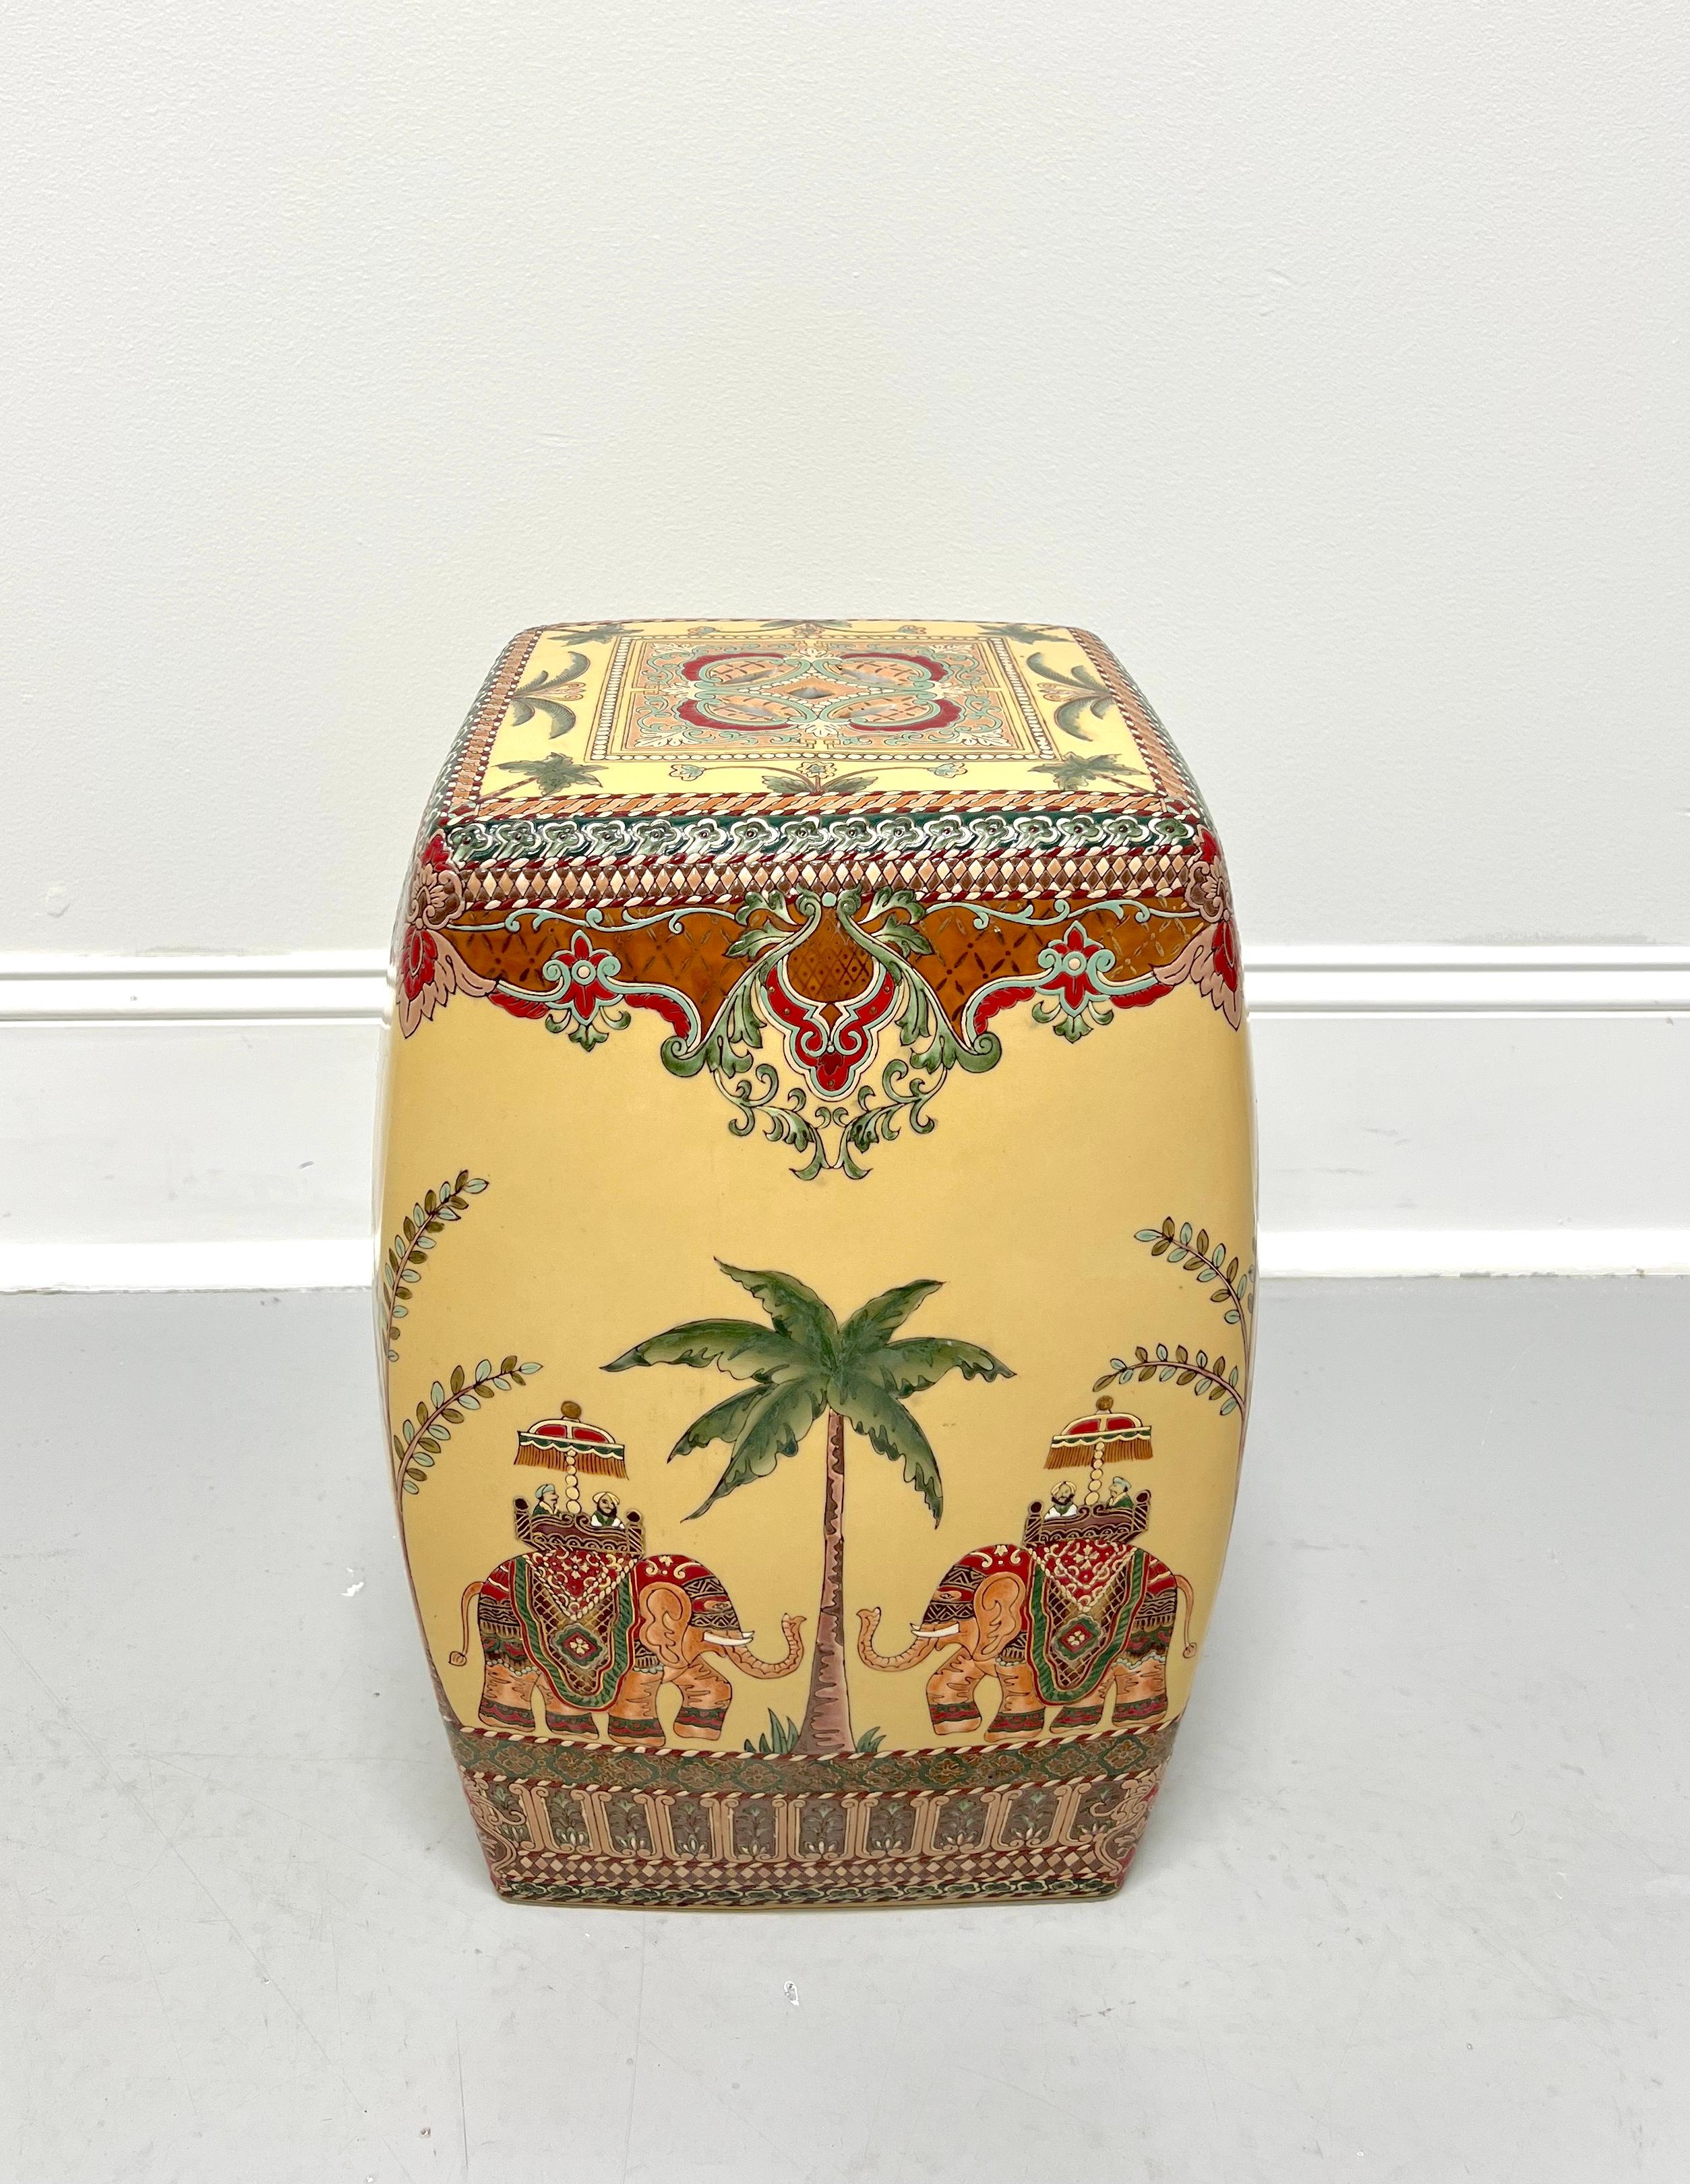 An Asian style ceramic garden stool, unbranded. Glazed ceramic in a square shape with decorative perforations, hand painted with a tropical motif of elephants, palm trees, and mosaic patterns. Likely made in Asia, in the mid 20th Century.